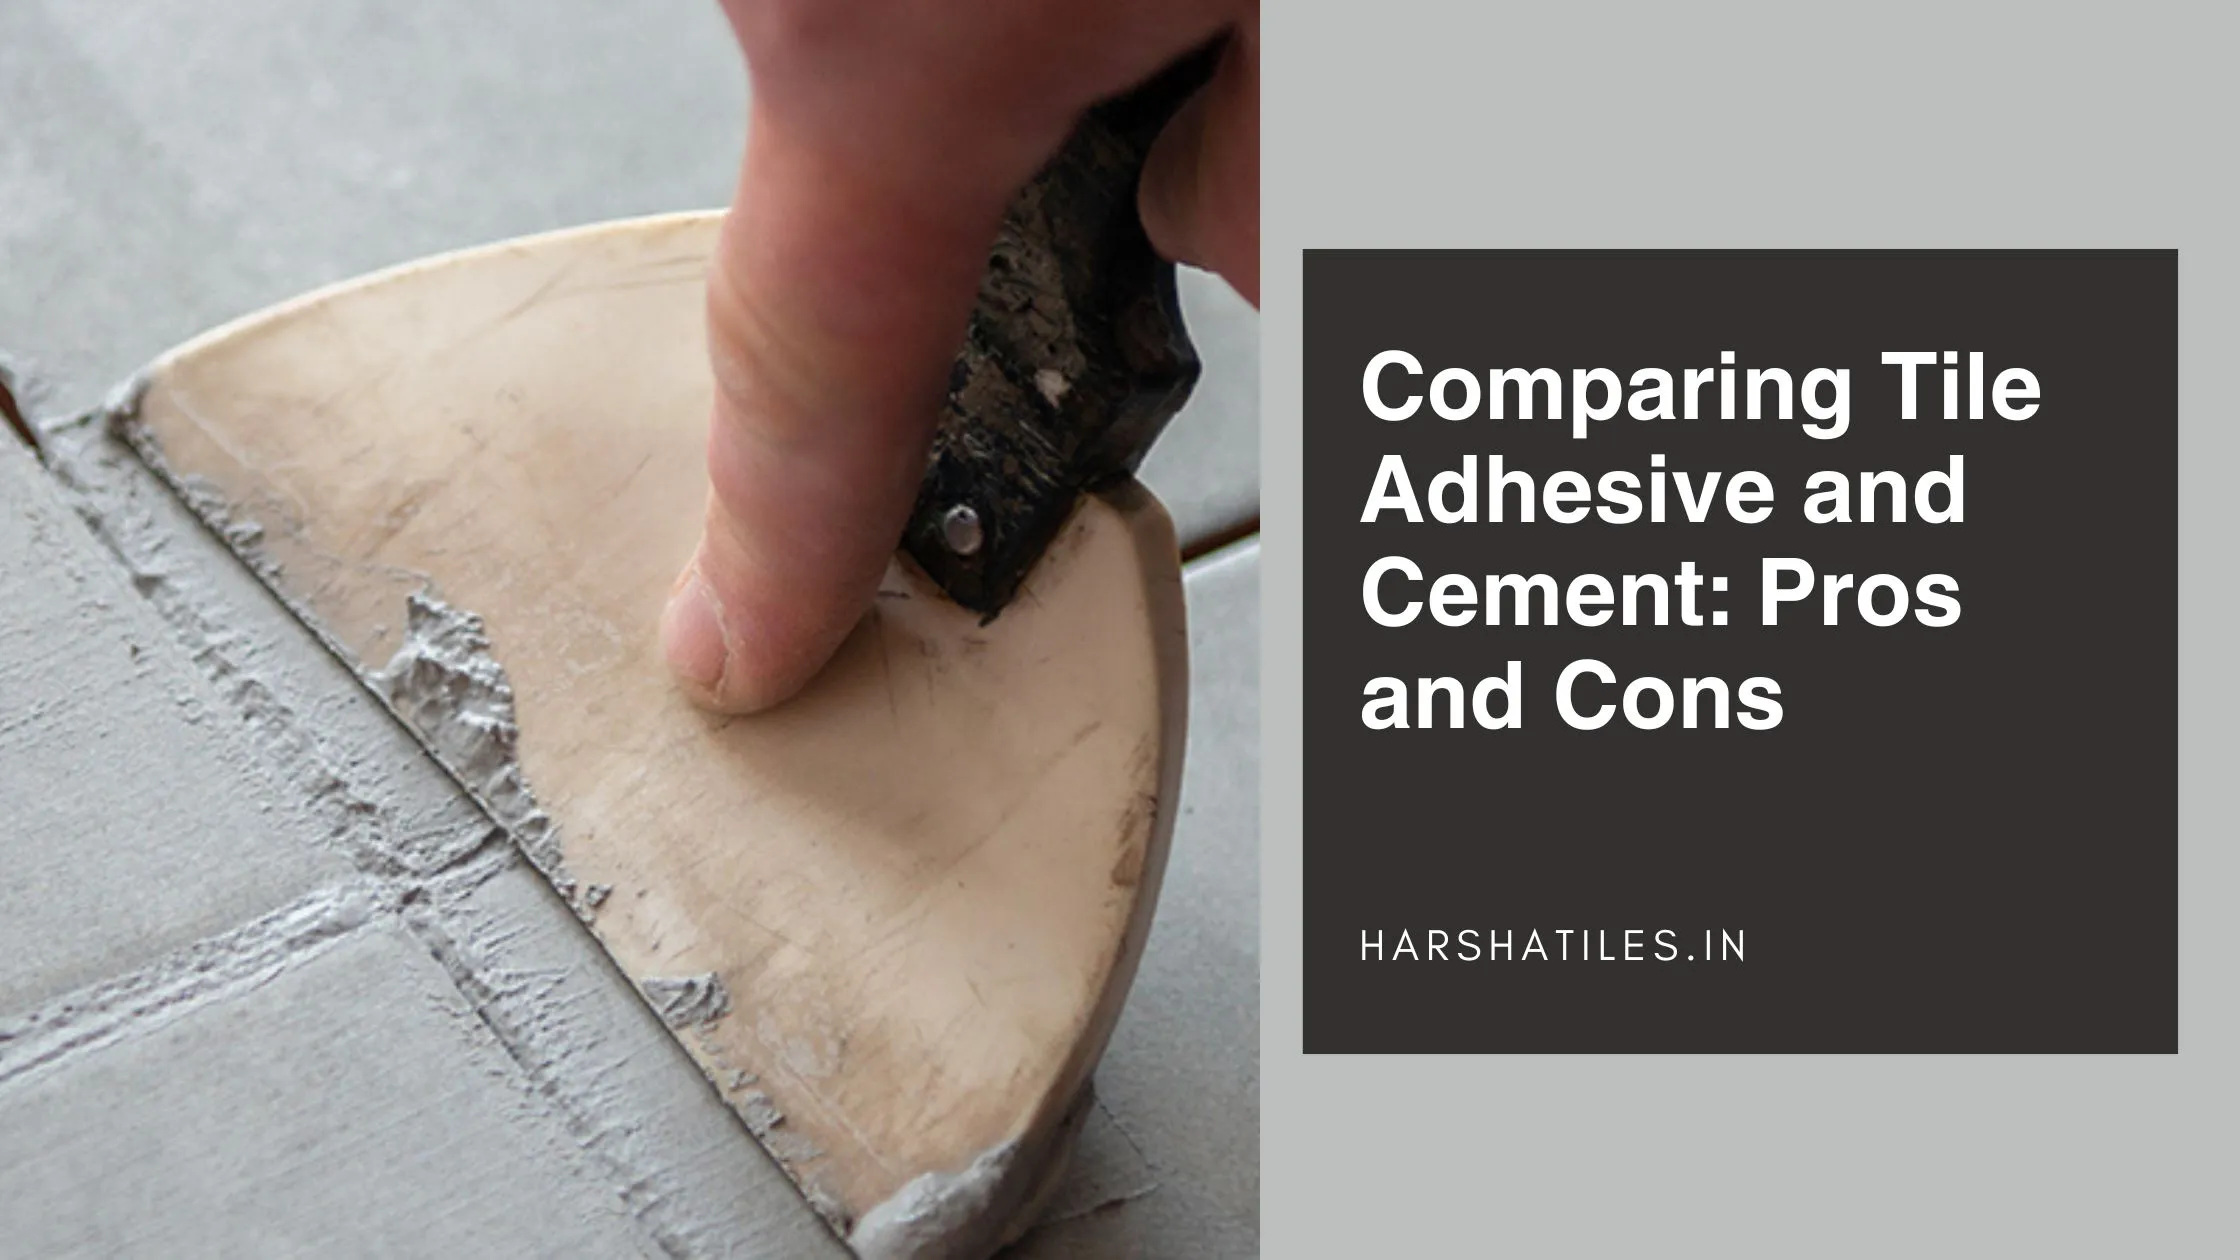 Comparing Tile Adhesive and Cement: Pros and Cons